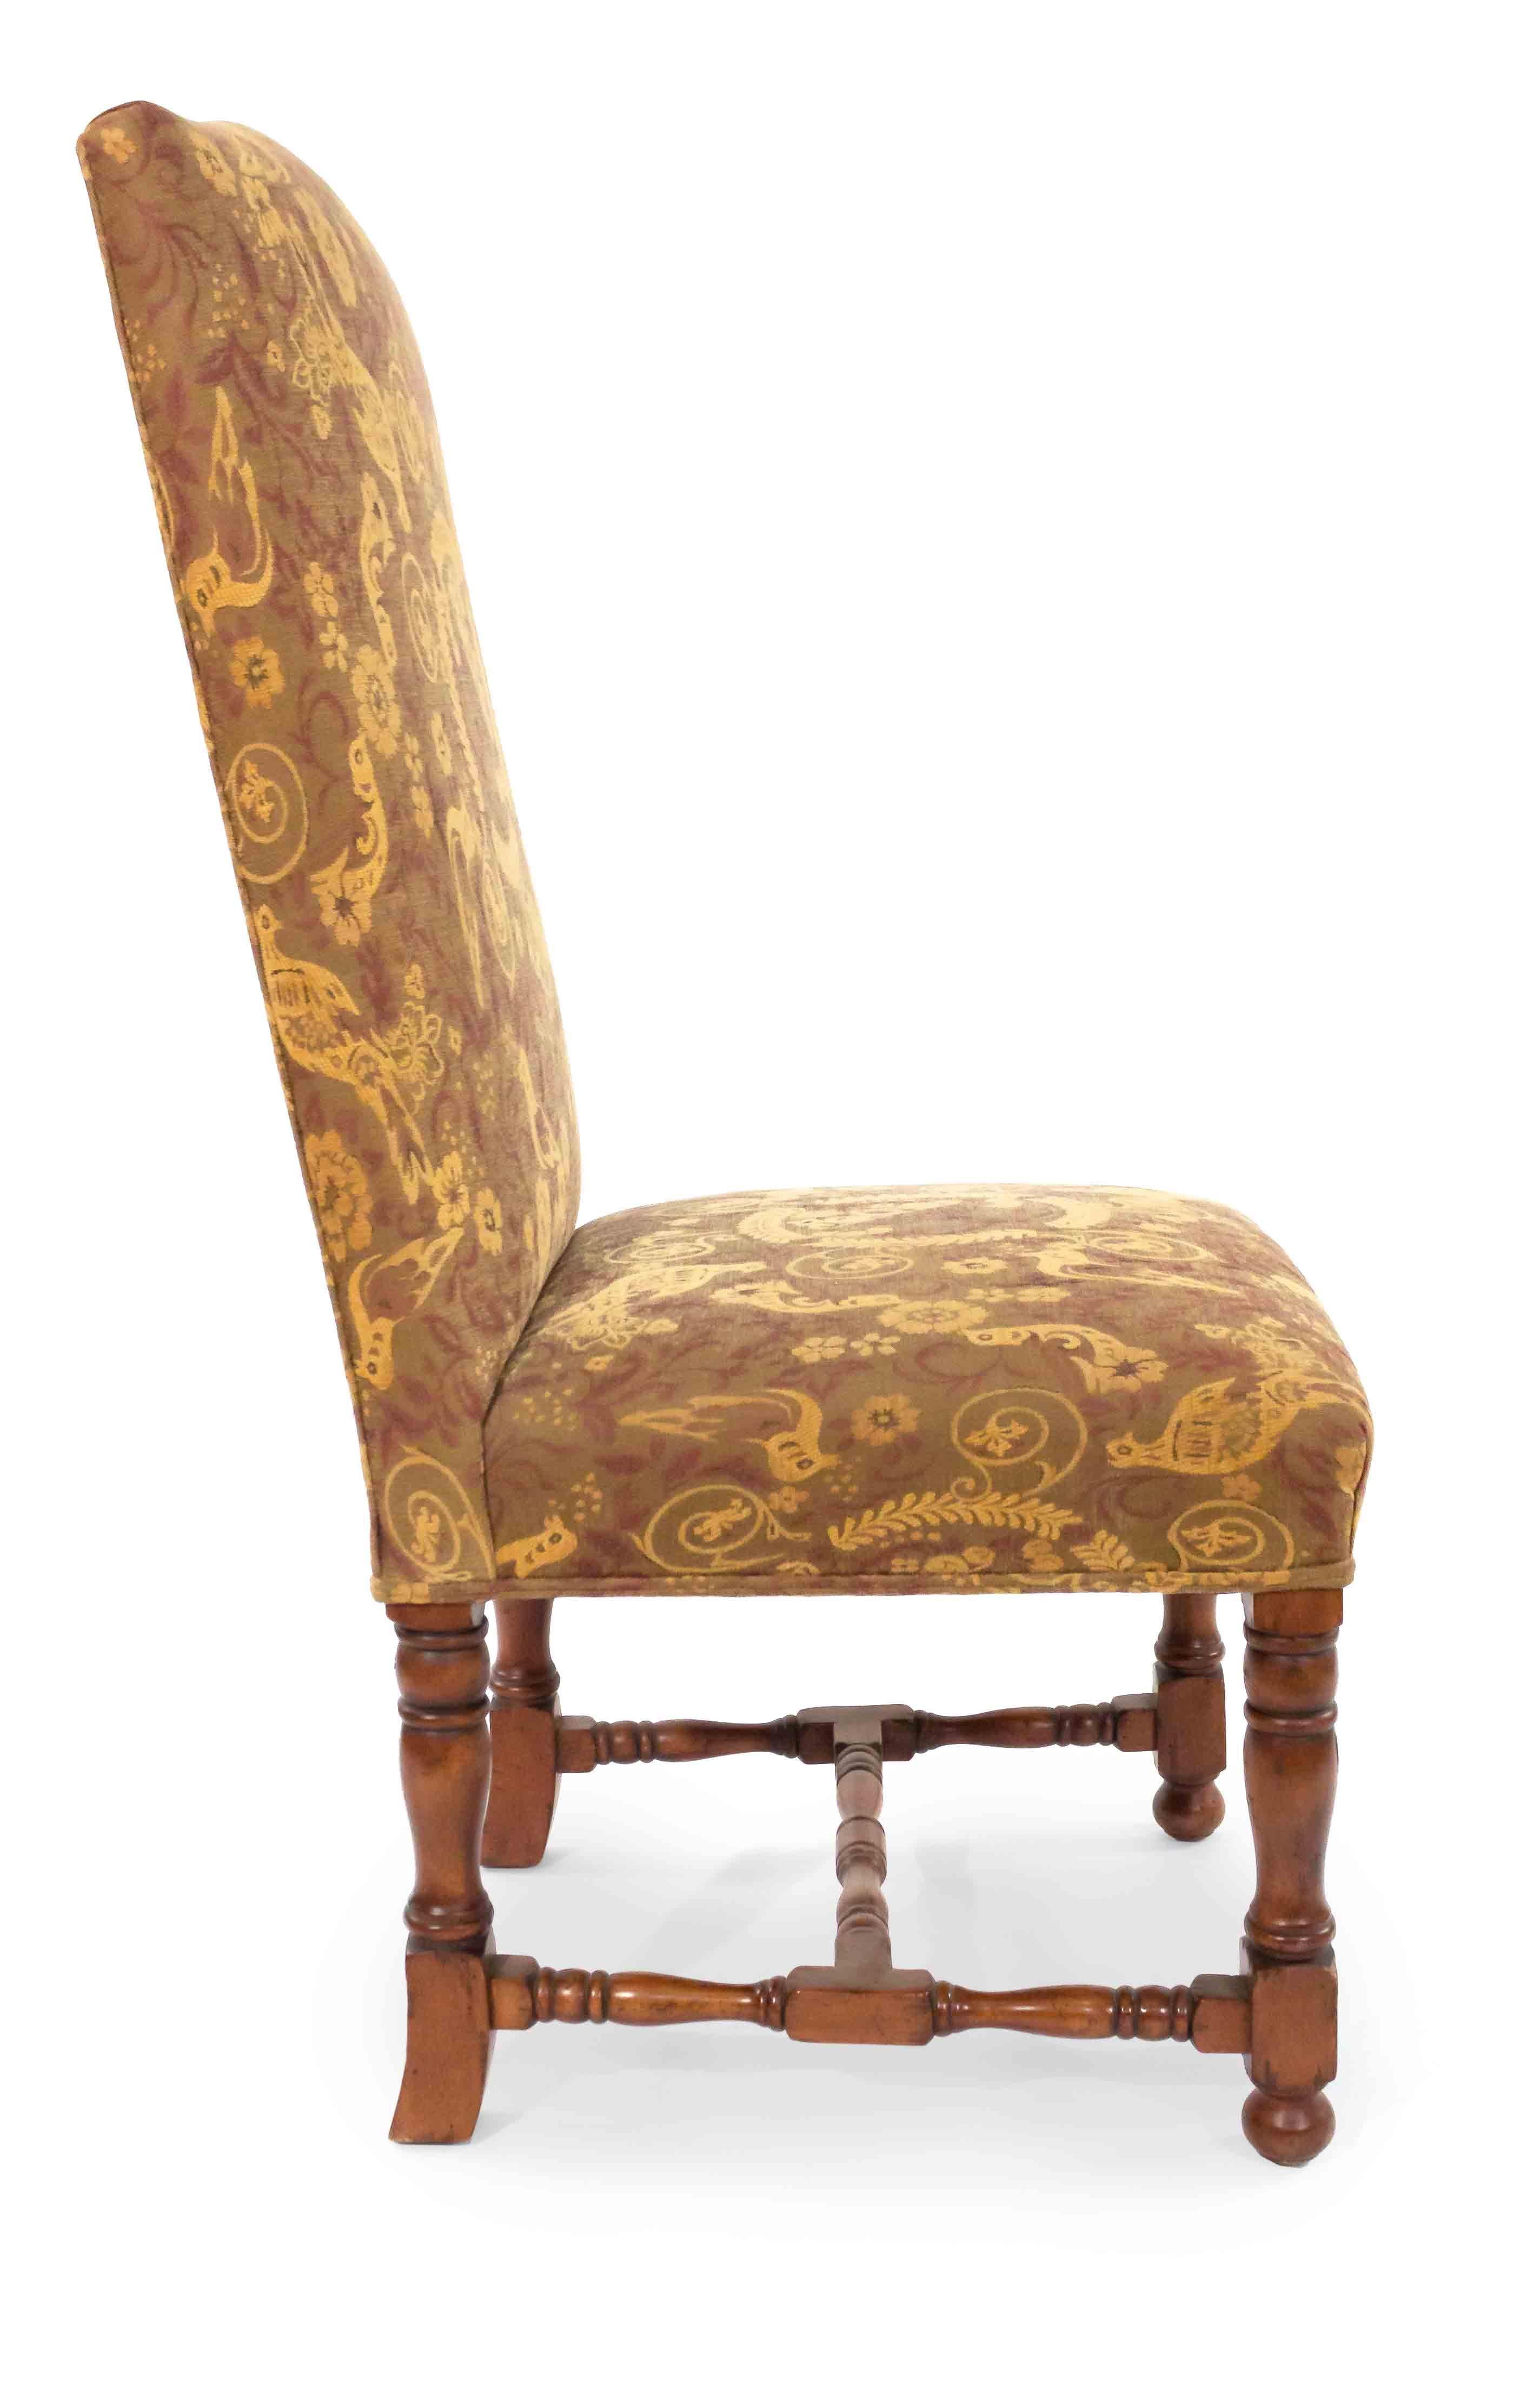 English High Back Renaissance Style Dining Chairs with Floral Upholstery